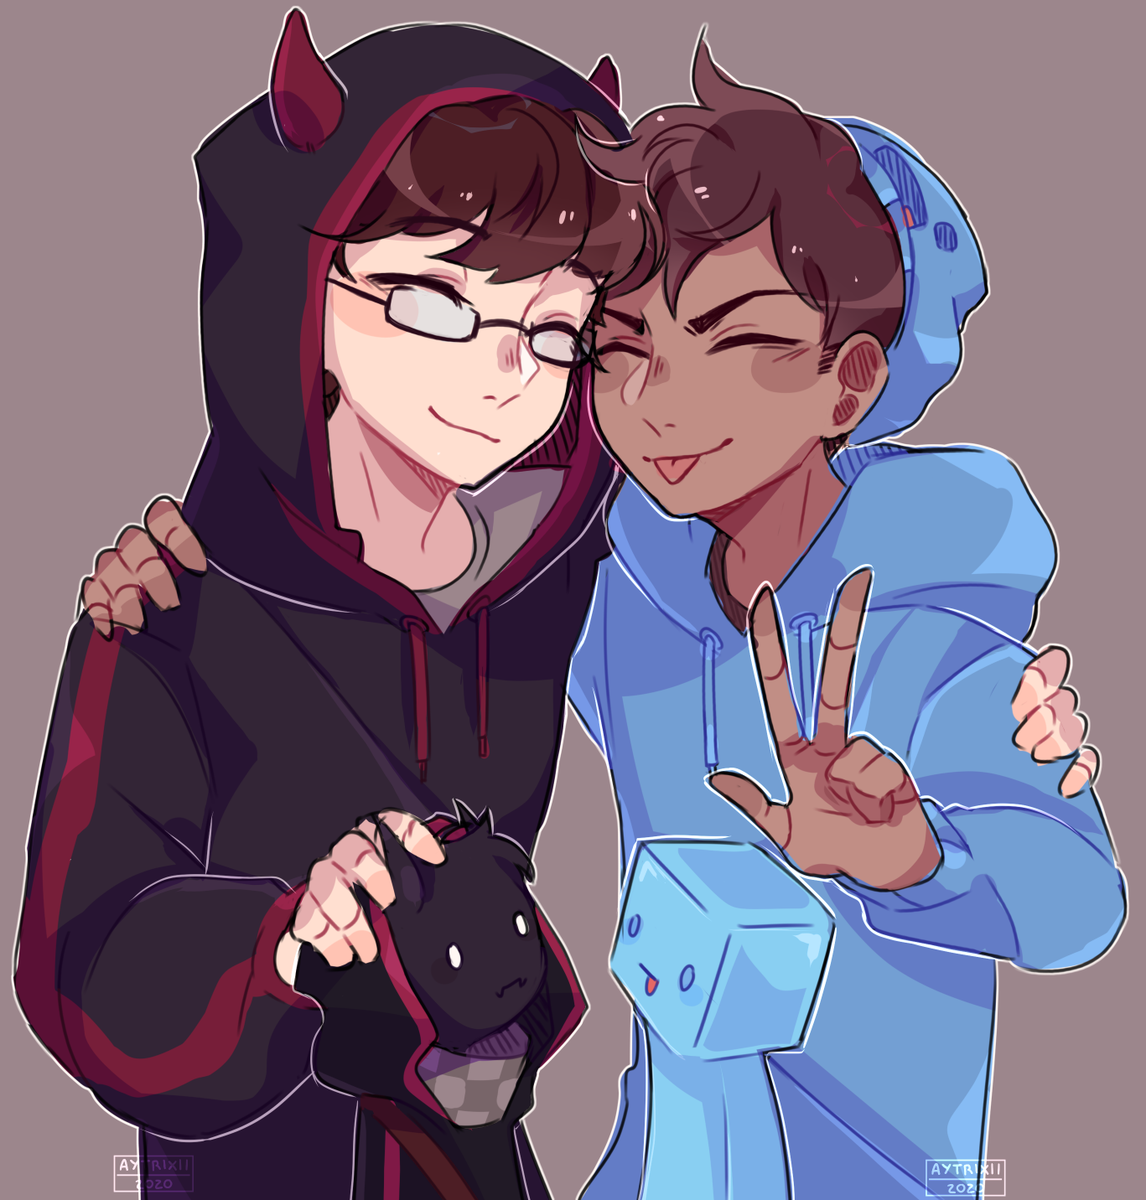 This is a drawing of Bad and Skeppy together as humans. They are both dressed in their minecraft skins' clothes. They each have one arm wrapped around the other's shoulder, and their faces are somewhat touching. Bad has light skin, brown hair, and is wearing glasses. He has red devil horns poking through his black and red hood. He's wearing a grey t-shirt under his black and red hoodie. His eyes are closed and he is smiling contently. Skeppy has tanned skin, brown hair, and is sticking his tongue out. He's wearing a light blue beanie with his minecraft skin's face on it. He wears a brown t-shirt under his light blue hoodie. The arm that is not around Bad is holding up a peace sign. His eyes are closed and he is smiling while also sticking out his tongue. Both Bad's and Skeppy's Minecraft skins have been drawn below in a cute style reminiscent of how Dream's blob is interpreted. They are quite small compared to the people above them, and they looked confused at each other. The hand that Bad doesn't have wrapped around Skeppy is placed on Bad's Minecraft skin's head.